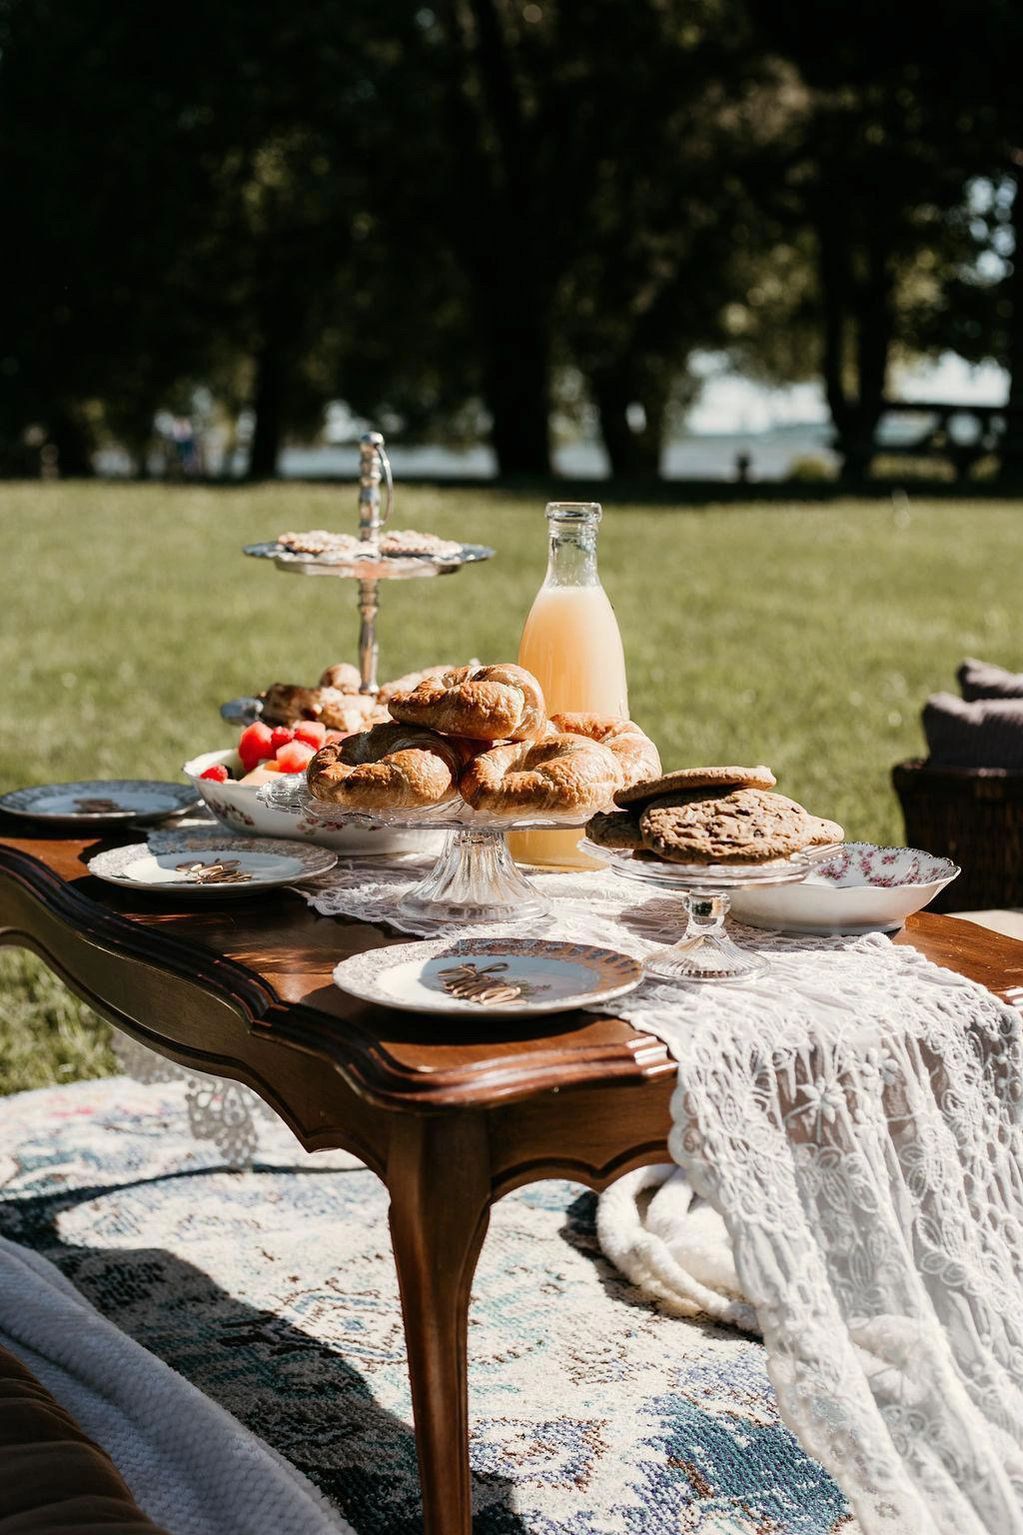 Picnic with vintage furniture